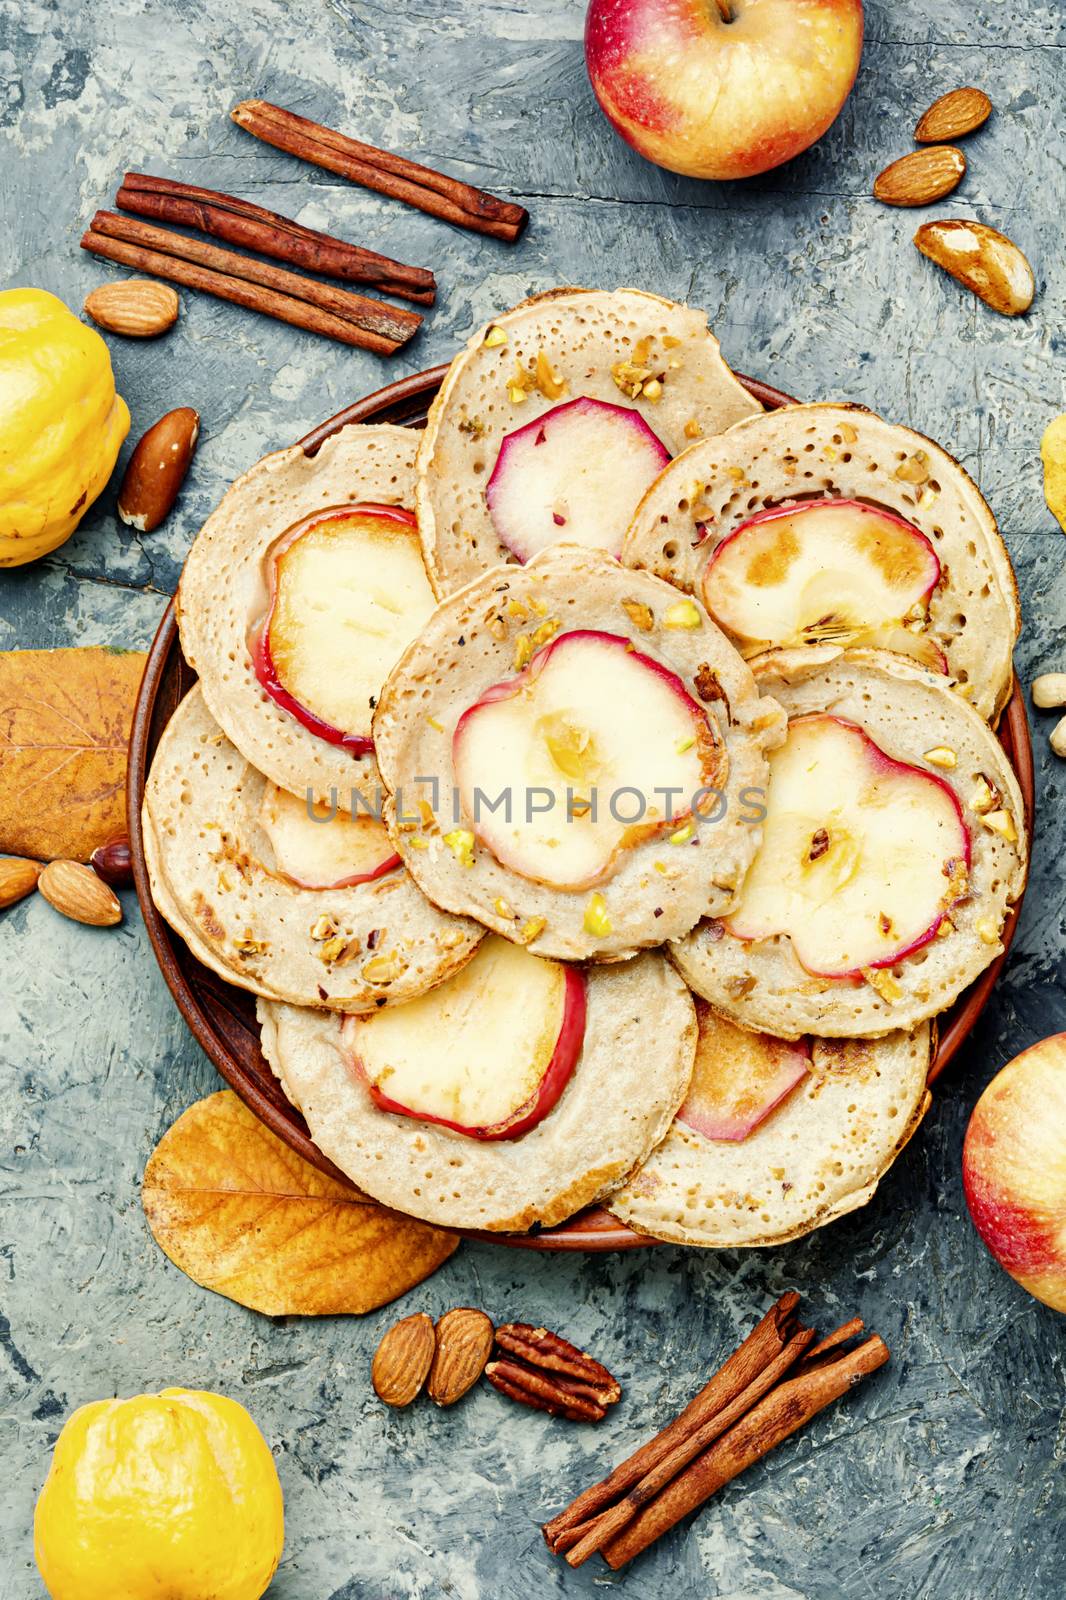 Fried pancakes with apples by LMykola